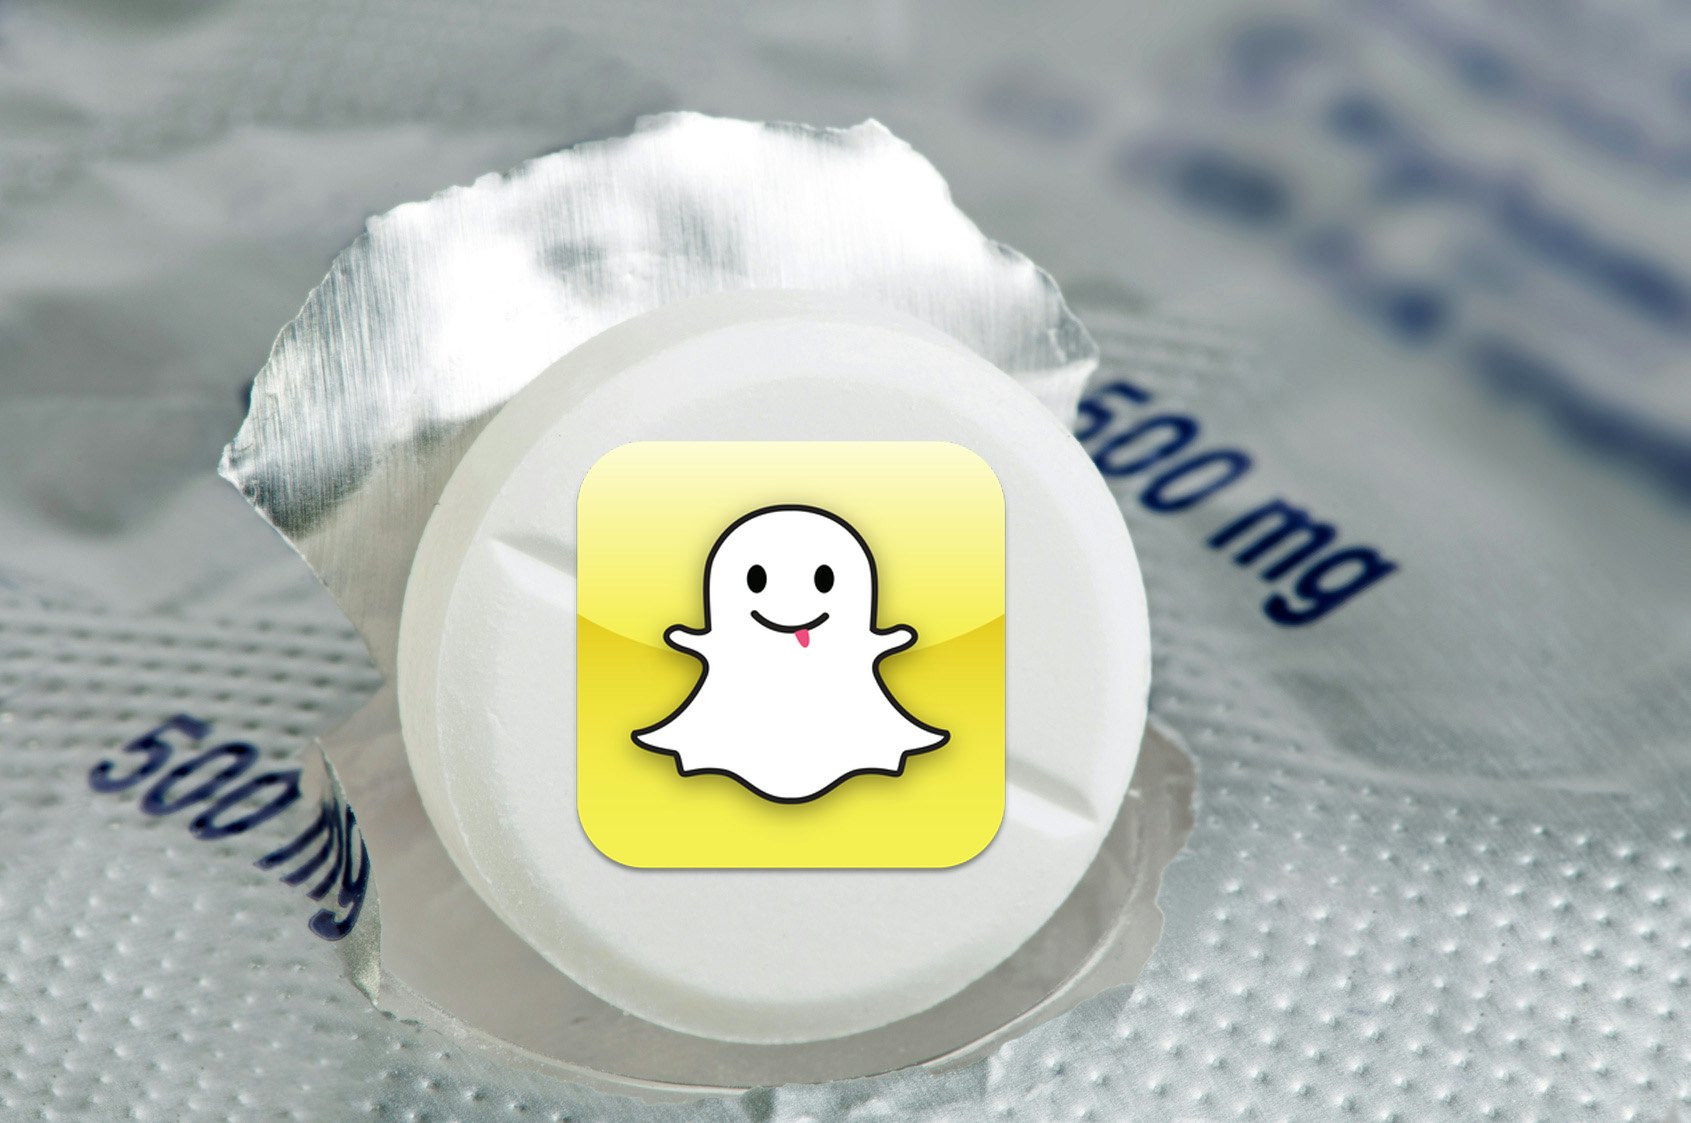 snapchat to root out drug dealers